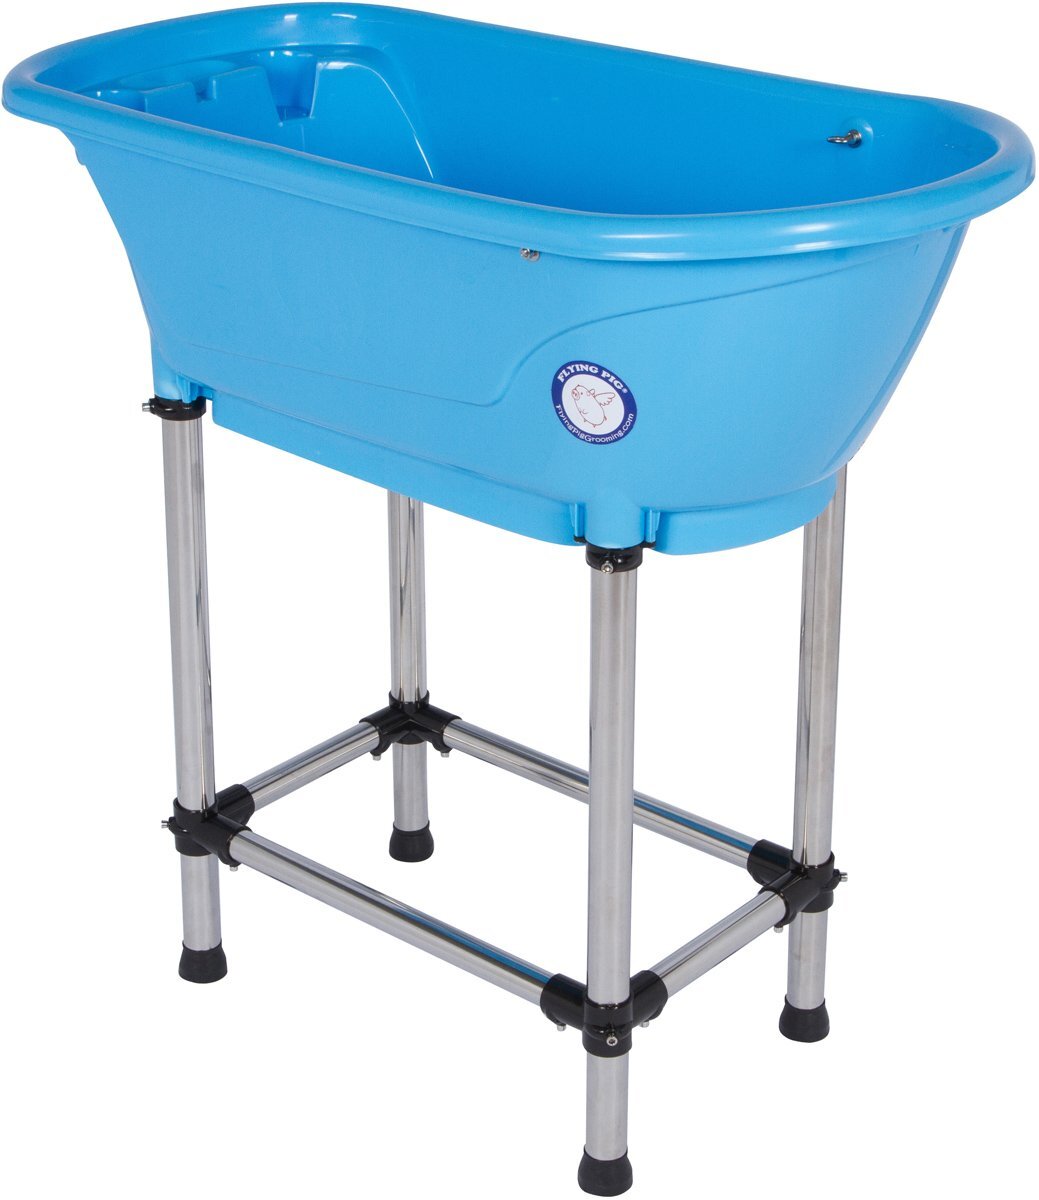 Small Portable Bath Tub For Dogs and Cats (Blue) Dog Pet Grooming eBay